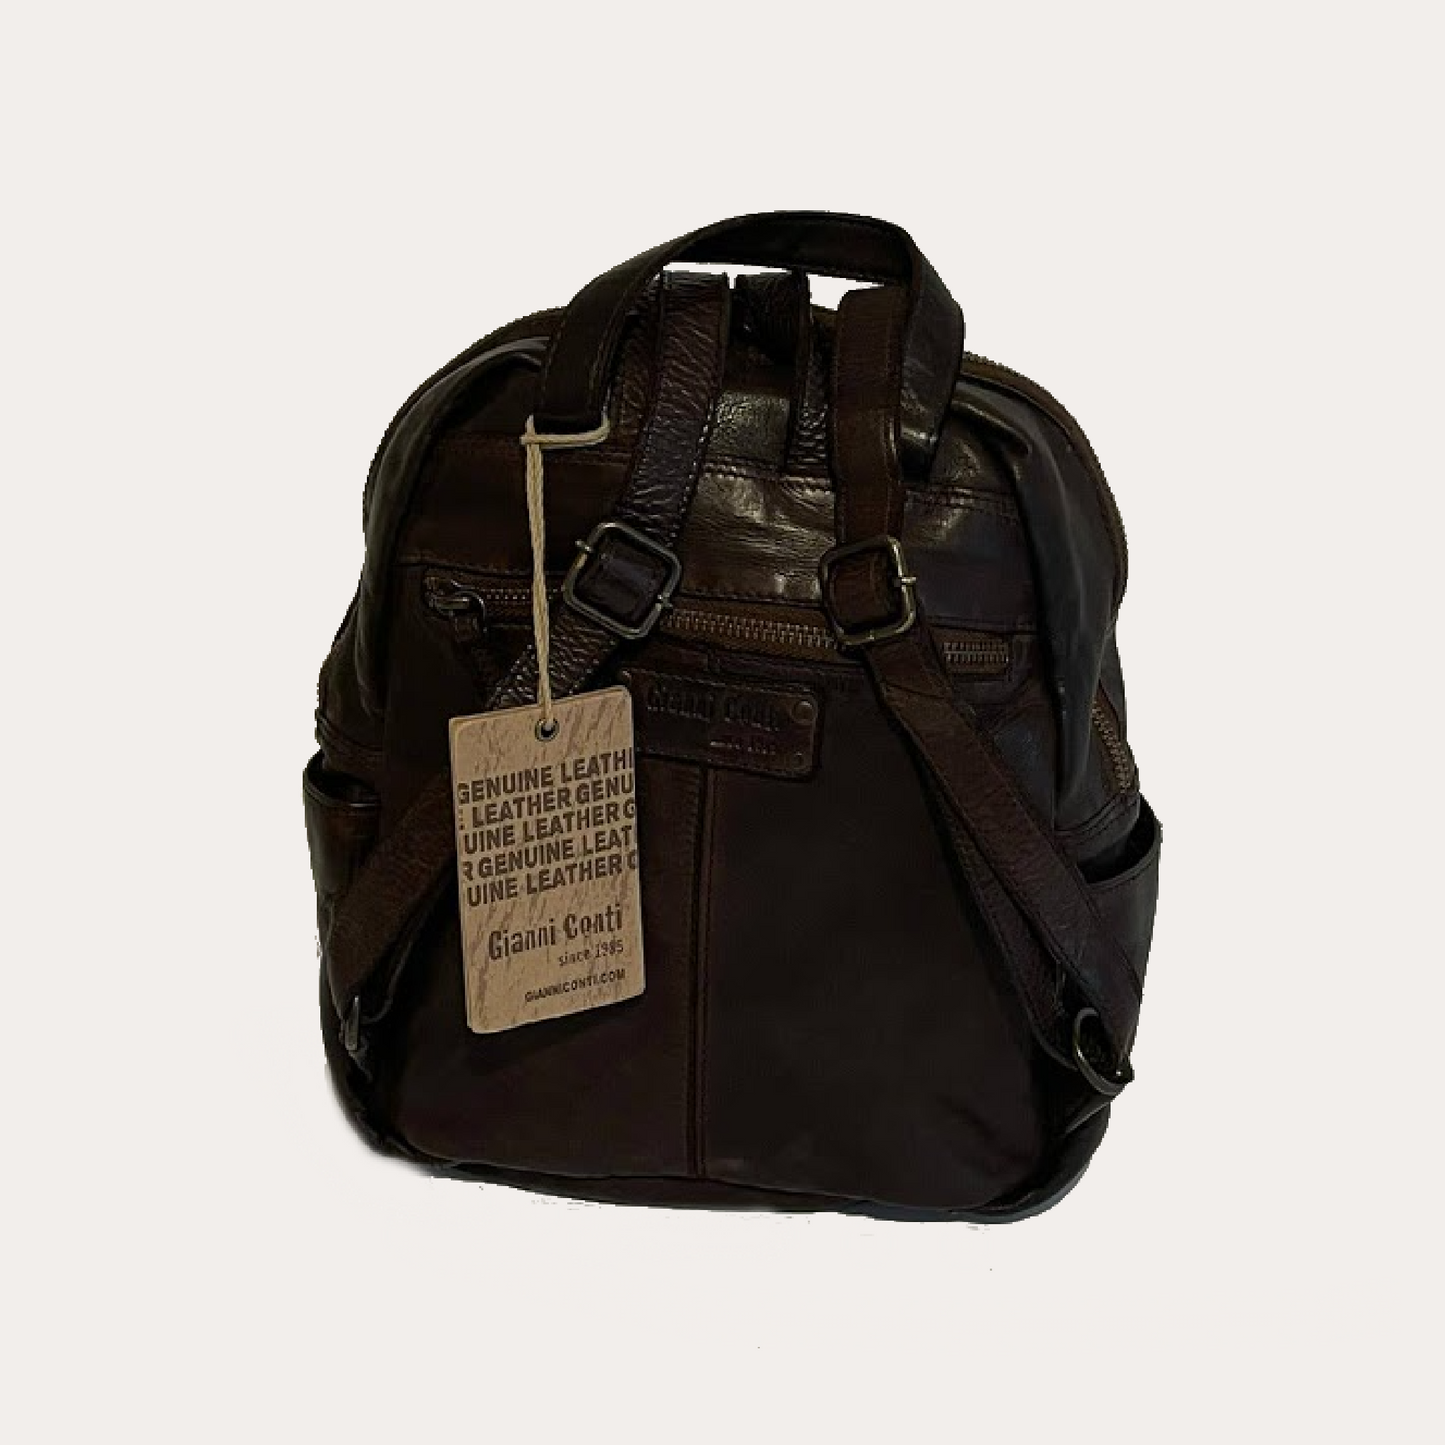 Gianni Conti Brown Vintage Leather Backpack